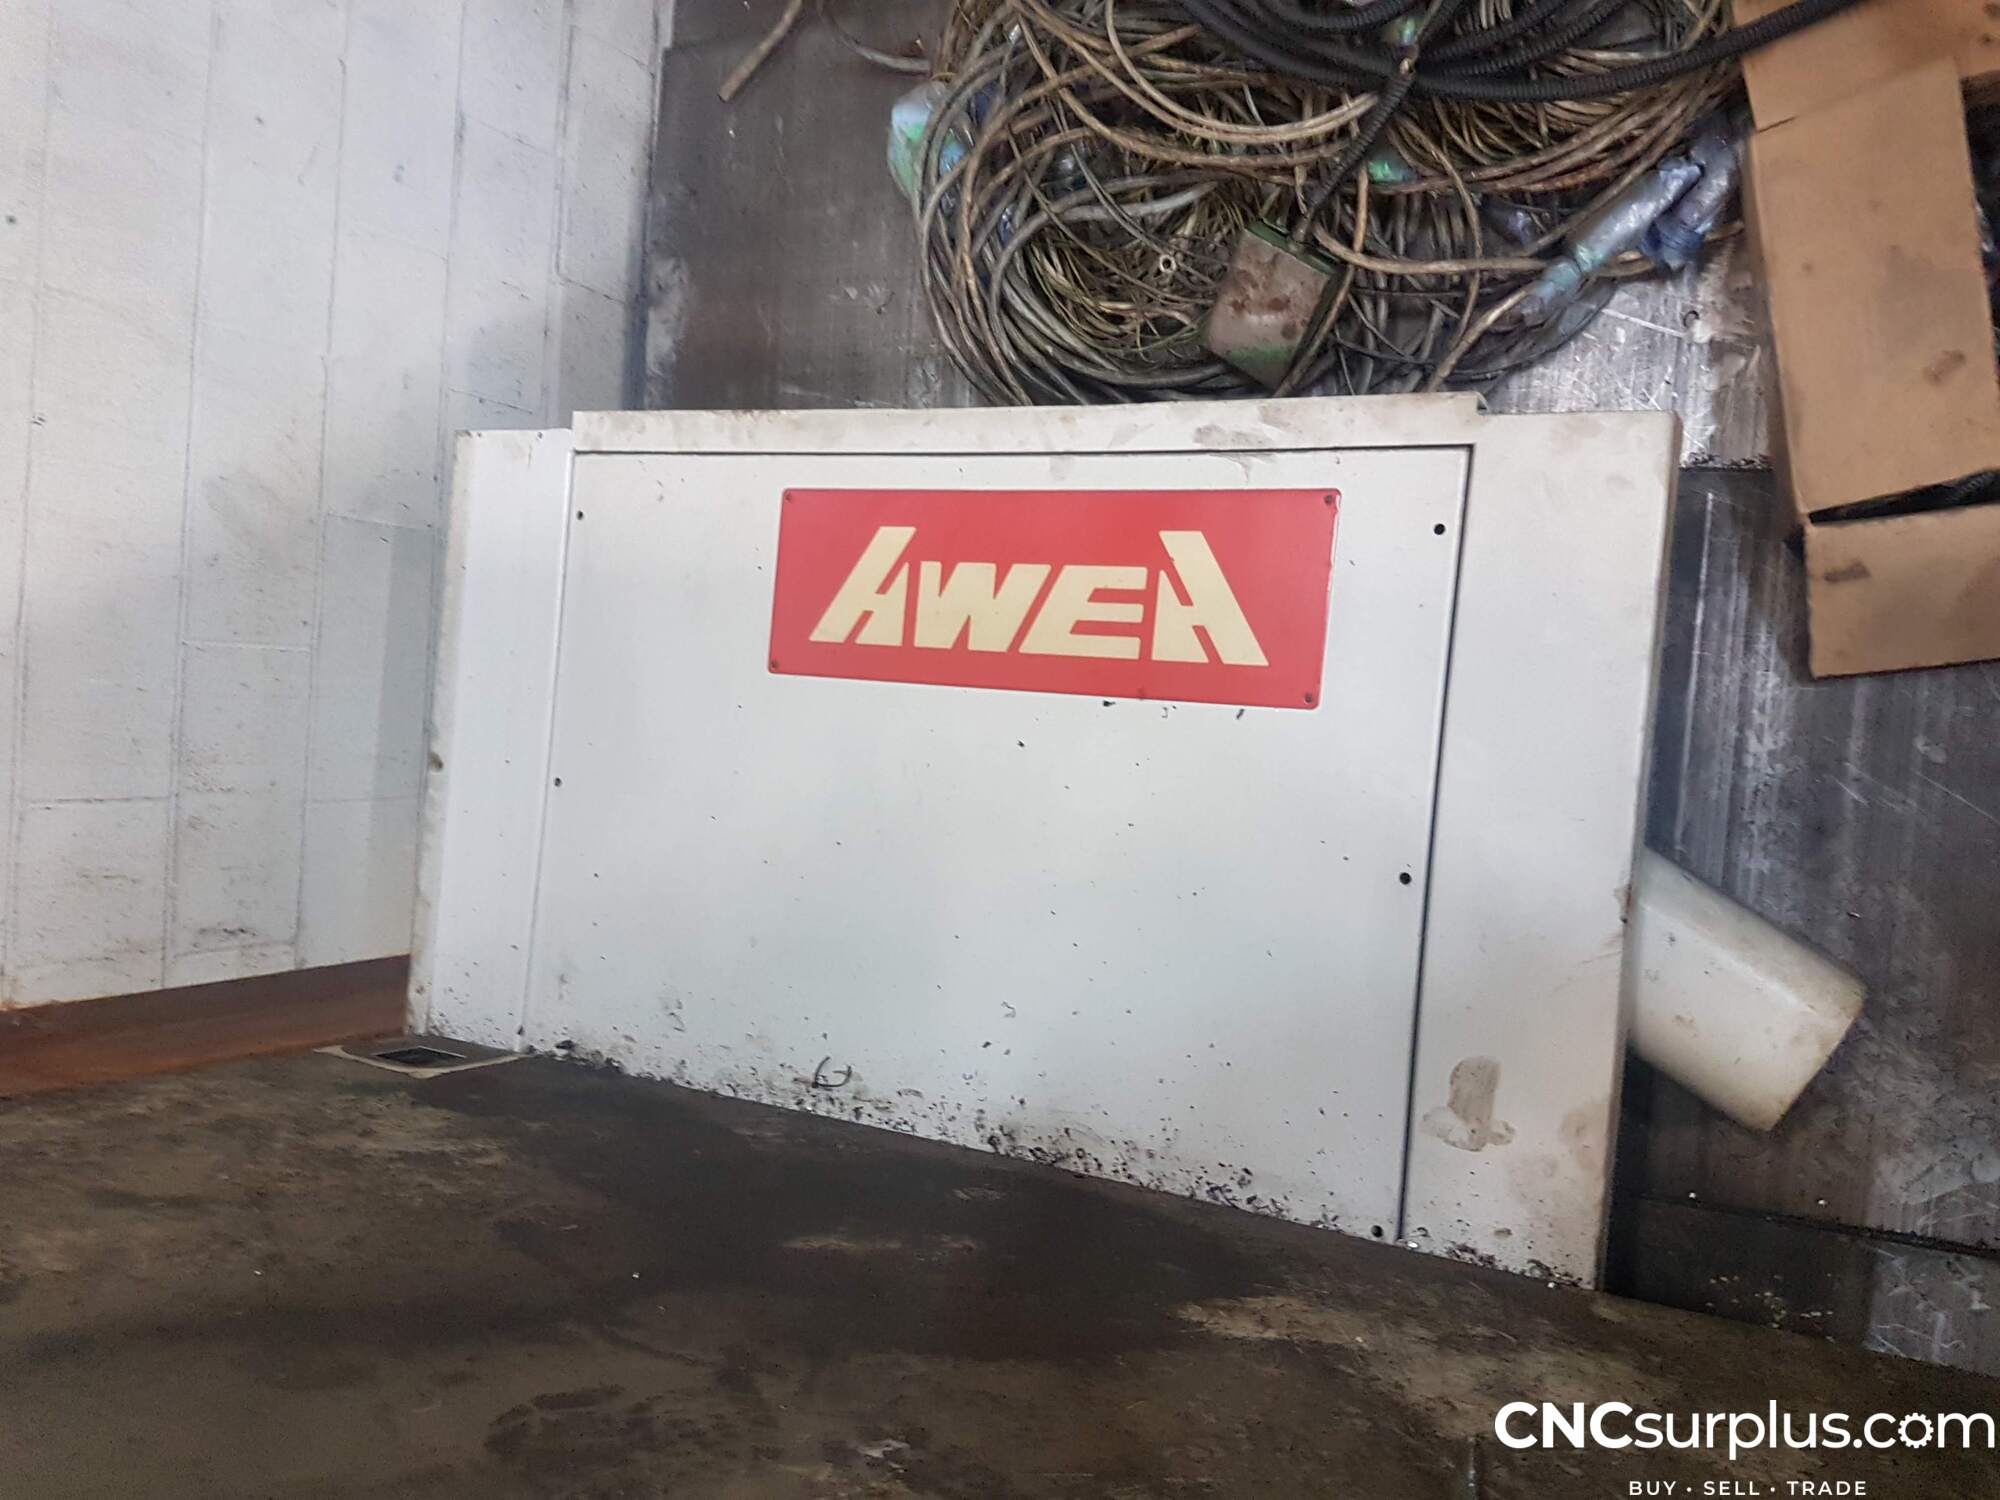 2006 AWEA BL3018FM Horizontal Table Type Boring Mills | CNCsurplus, A Div. of Comtex Leasing Corp.